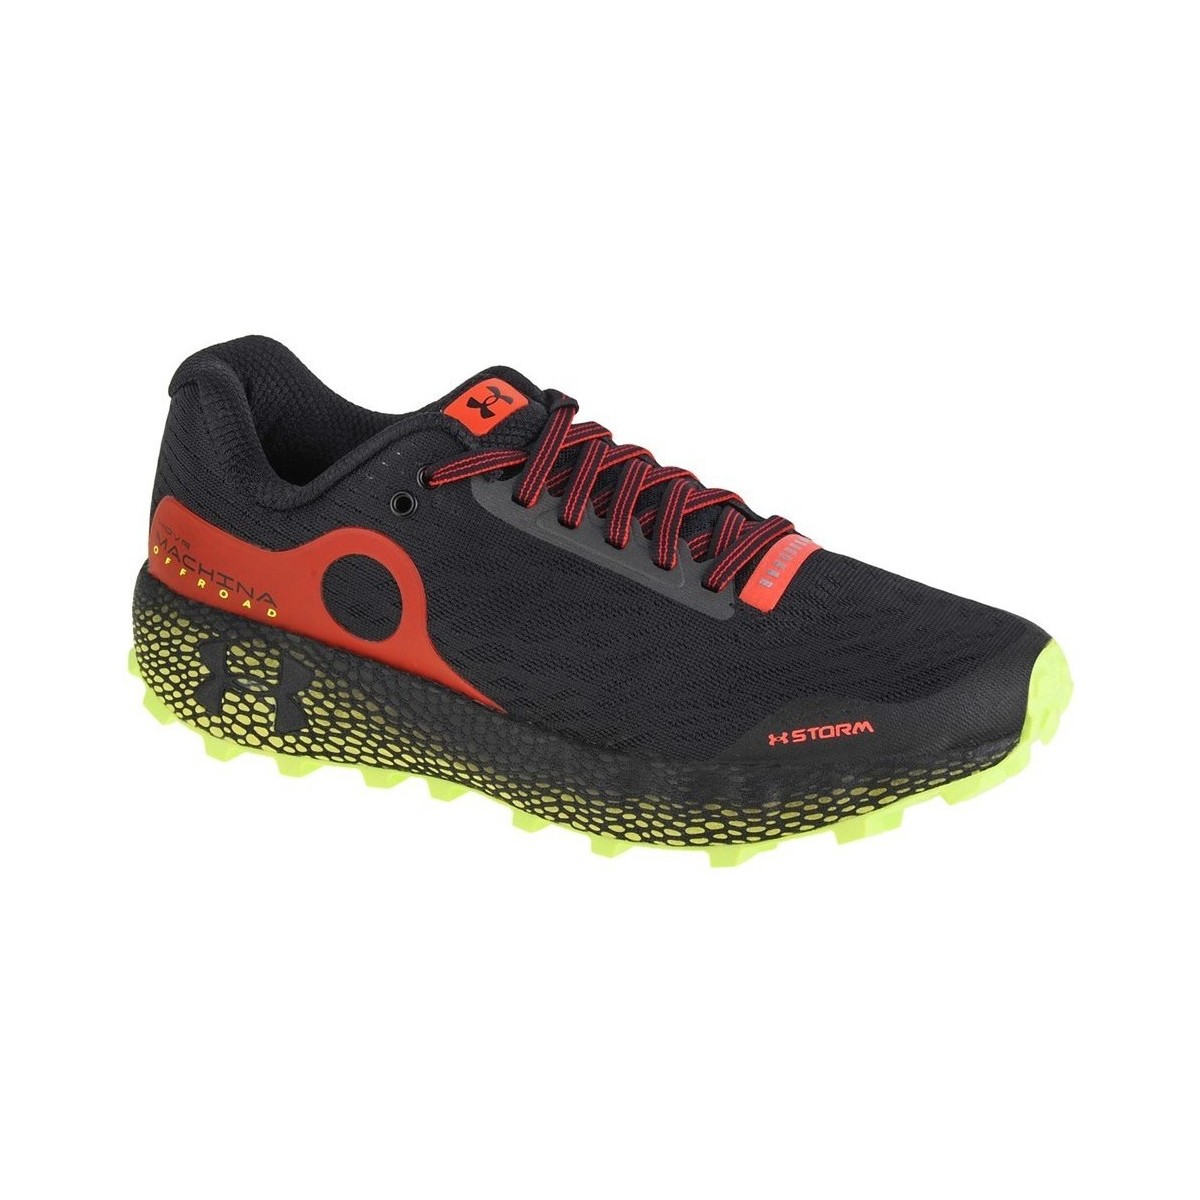 Under Armour Hovr Machina Off Road M Black